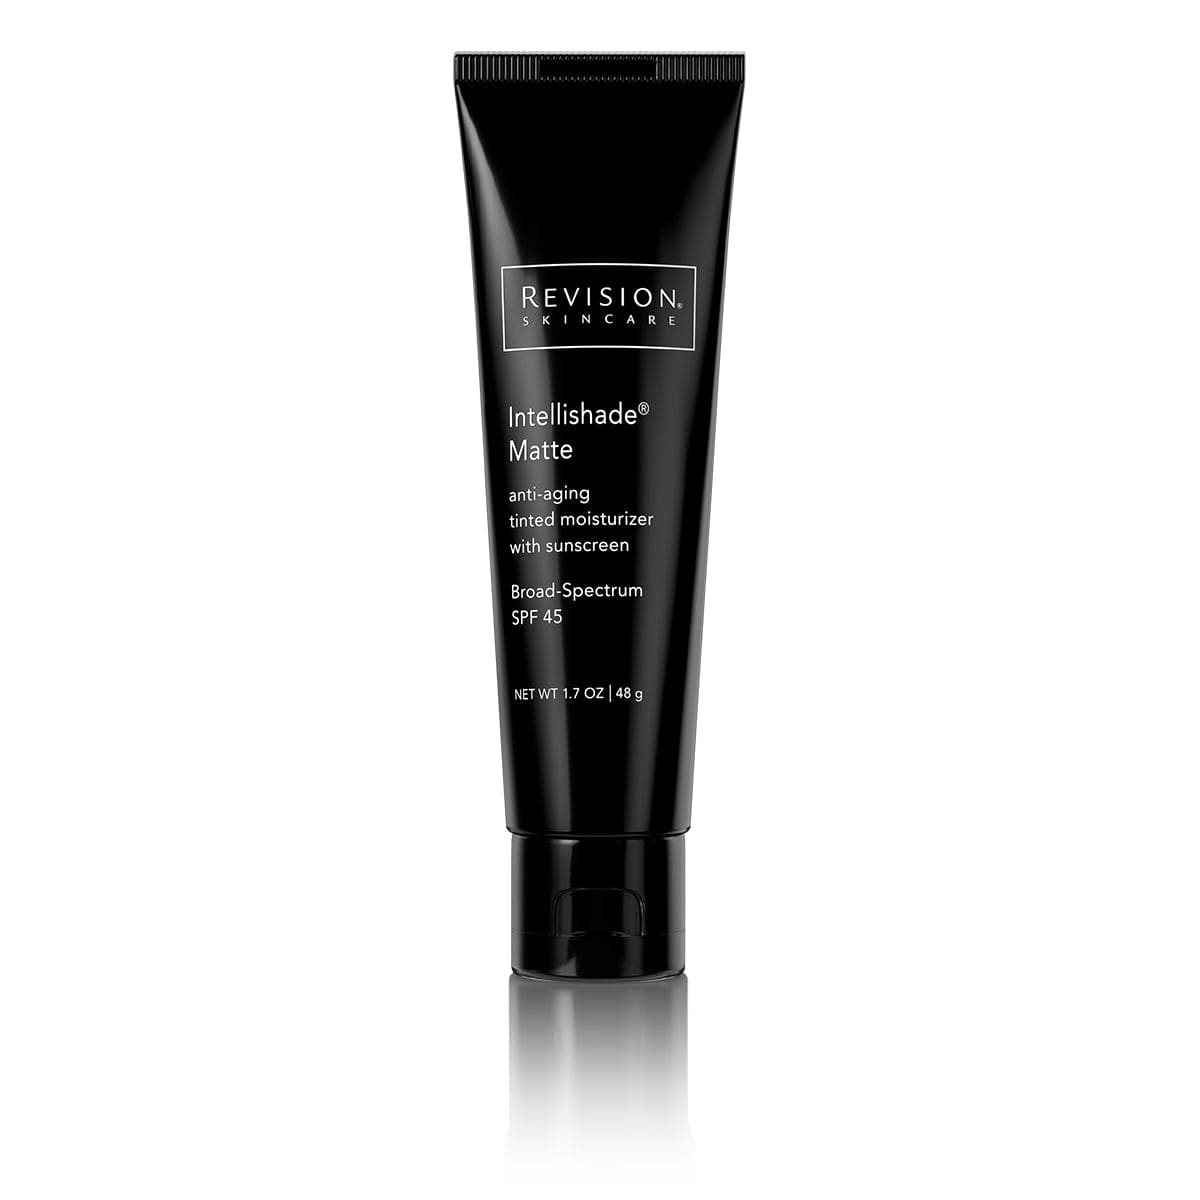 Intellishade Matte- age-defying tinted moisturizer with sunscreen. Tube Front